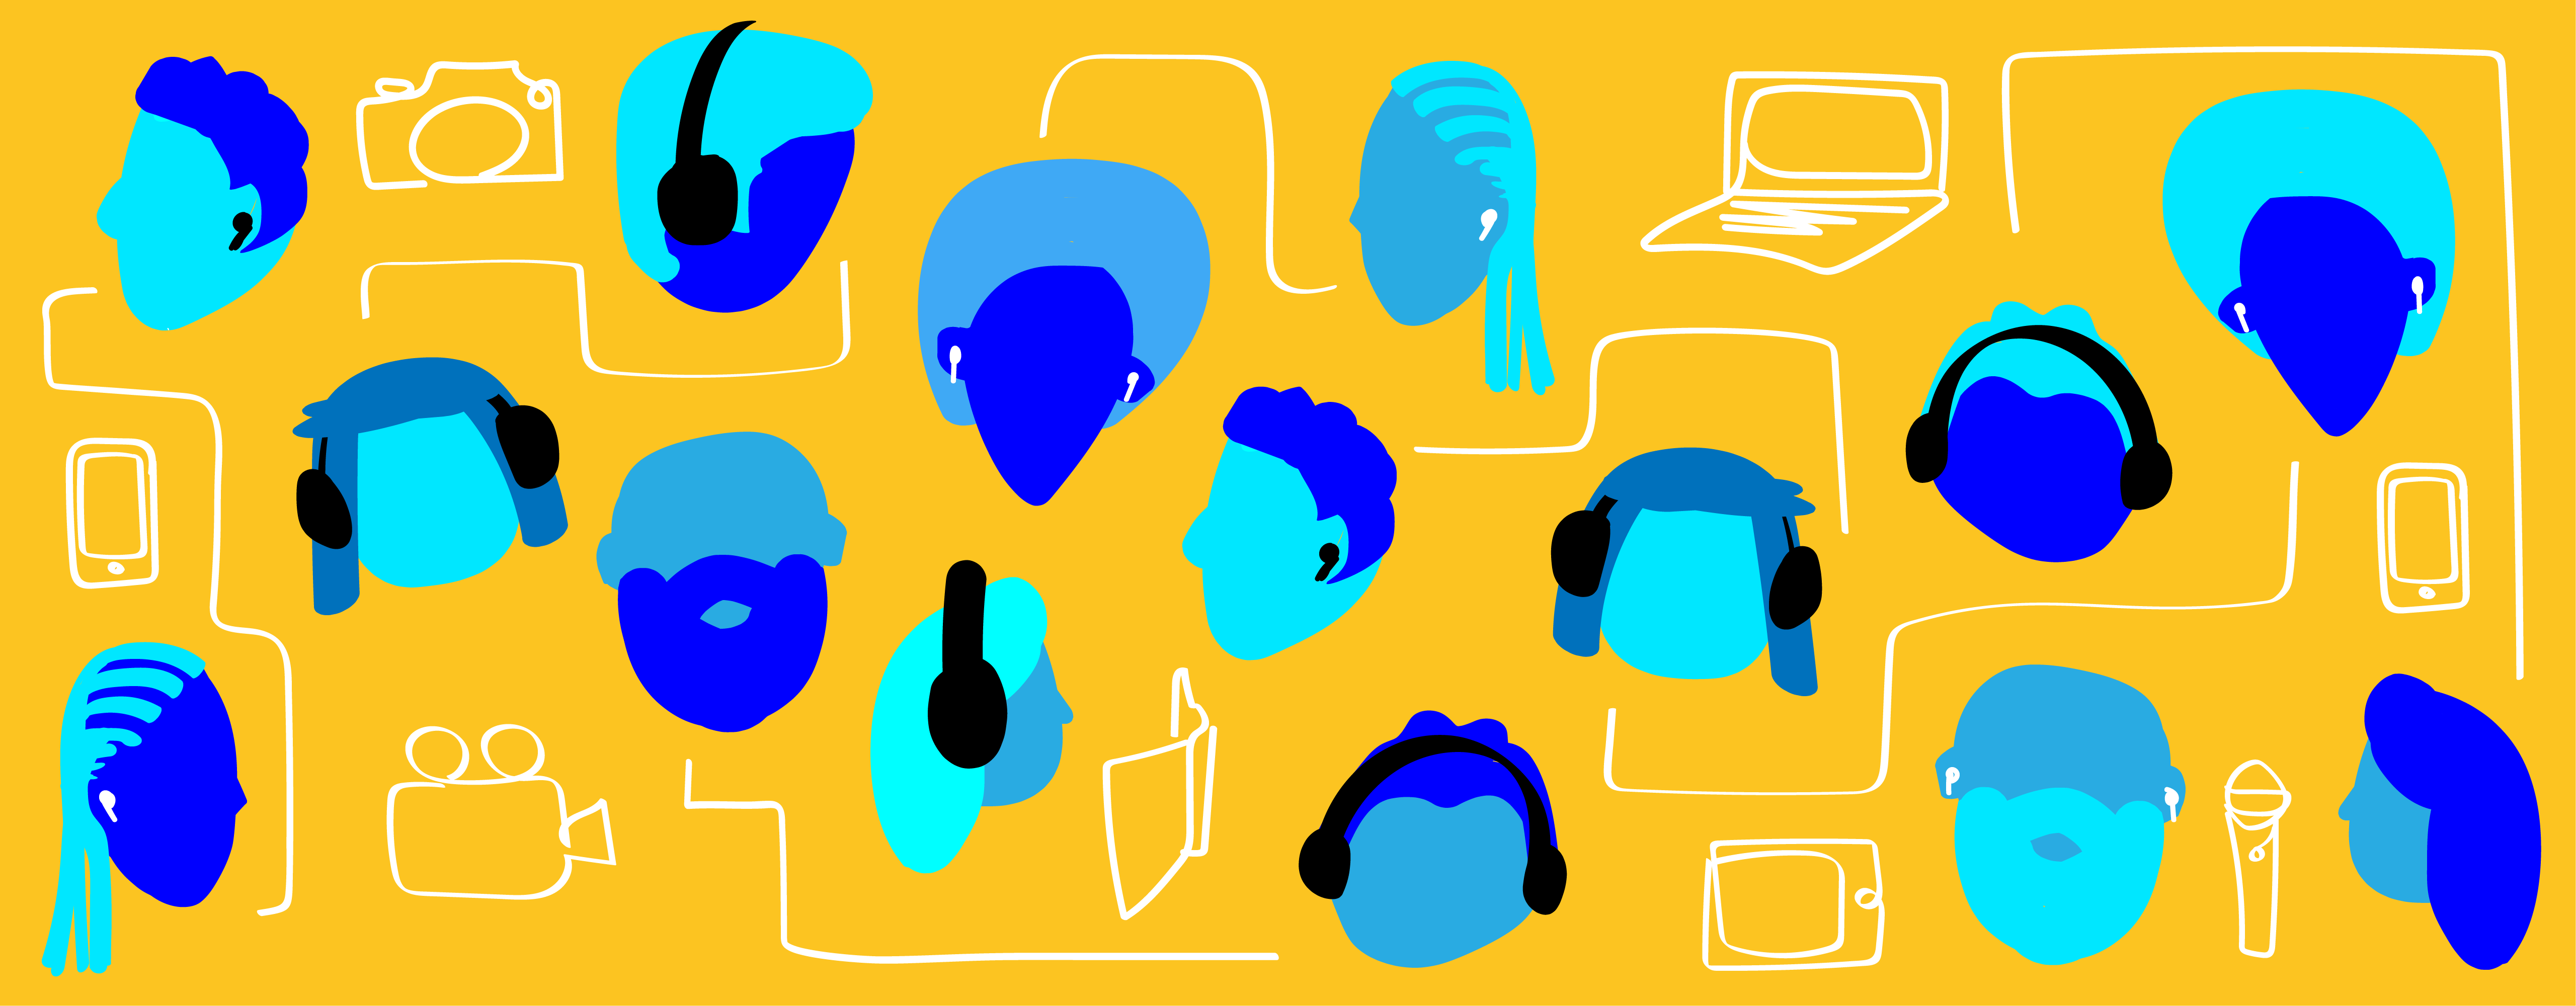 Graphic showing many heads, some with headphones, and various devices such as laptops, phones, and tablets